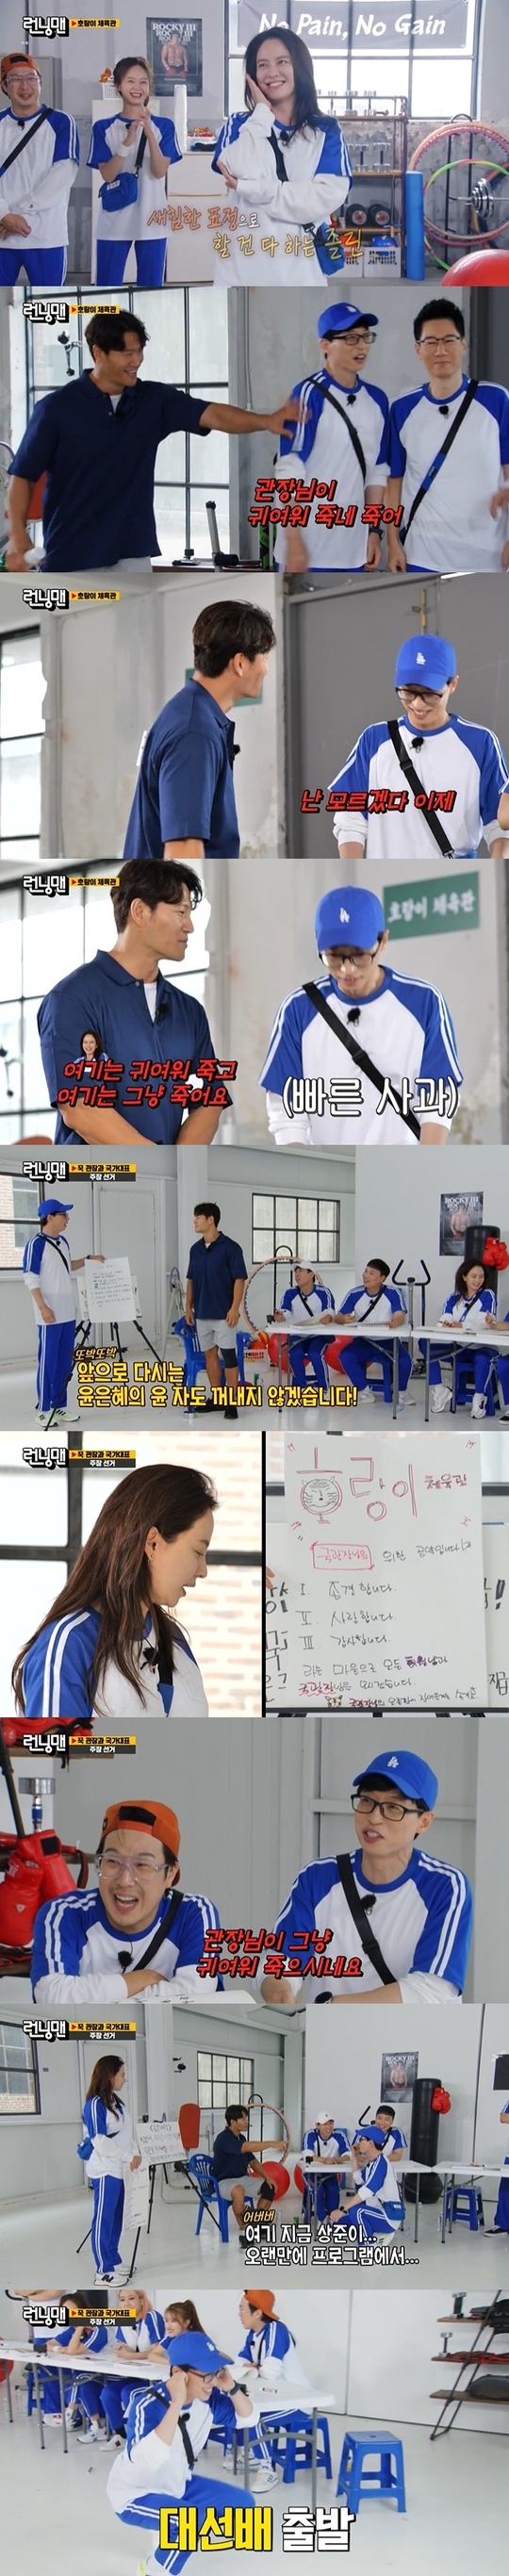 Yoo Jae-Suk captures Kim Jong-kook Song Ji-hyo Thumb and Gums in full bloomIn the 571th SBS entertainment Running Man broadcast on September 19, guest Lee Young-ji, Lee Mi-joo and Lee Sang-joon were held with the head of the national team.The members gathered in a shabby container on the day, a tigwat gym run by the head of the Hung-Kwan Kim Jong-kook.Kim Jong-kook once recruited an elite athlete, but now Kim Jong-kook has recruited a one-day gym for free.First, the existing ones were One Yoo Jae-Suk, Ji Suk-jin, Haha, Song Ji-hyo, Jeon So-min, and Yang Se-chan.Kim Jong-kook made a cover stage that was shown at the previous fan meeting as soon as he saw them.Yang Se-chan, Jeon So-min played the joint stage, and Song Ji-hyo played the Rolin of the Brave Girls.Kim Jong-kook laughed at Song Ji-hyos stingray dance.Yoo Jae-Suk captured it like a loveline mania without missing it.Yoo Jae-Suk teased the director is dead of cute, and Song Ji-hyo, who recently decided to accept a love line with Kim Jong-kook, said, Did you want to see it?Even Kim Jong-kook is accepting that he is I do not know that he is unwound, but I feel relaxed.Haha and Jeon So-min showed an exciting watching mode saying there is a thumb.Yoo Jae-Suk led Kim Jong-kooks love line more than anyone else, Yoo Jae-Suk said: I saw it, I dont know, now.I saw the molars of the director, Kim Jong-kook, Song Ji-hyo added a few more words than others.Eventually Kim Jong-kook issued the threat of an explosion, Here (Song Ji-hyo) is cut dead and here (Yoo Jae-Suk) just dies.Then came the new ones: Yoo Jae-Suk, who called entertainment monster Lee Young-ji, Lee Mi-ju and just Lee Sang-joon.Yoo Jae-Suk introduced Lee Mi-joo as a Jeon So-min division, and suspected that Lee Young-ji, who does not have a new issue and does not stick well with Lee Mi-joo, I have a lot of people around me these days.Lee Sang-joon said, Shall we come next? He voluntarily laughed at the exit.Games rules on the day were that nine members of the episode One and the head of the hunch team Kim Jong-kook had to compete in various competitions (missions) to collect the most prize money.Kim Jong-kook cannot receive the prize money but could instead be paid to the ones in the society.Kim Jong-kook was also given the authority to train Ones every time he did.Former Game Kim Jong-kook and One members elected from the claim to take charge of the director.The captain was not only given 100,000 One congratulatory money for each mission, but also privileged to be out of the training of Kim Jong-kook,Ones, who burn their enthusiasm to be elected as captains, made a pledge to capture the hearts of one one and Kim Jong-kook with five votes.The most eye-catching of all is Yoo Jae-Suk.Yoo Jae-Suk, in its own way, is a Kim Jong-kook taste sniper pledge: I will never talk about Mr. Yoon Eun-hye.I will not take out Yoon Eun-hyes Yoonja again in the future. Kim Jong-kook said, I have done it four times now, but Yoo Jae-Suk responded shamelessly, saying, I will not do it in the future.Yoo Jae-Suk then made Song Ji-hyo a candidate and introduced Re-Ment, Song Ji-hyo, the best match for the right arm of the chief of staff. The director just dies.Im not interested in your love affair, he teased.Eventually Kim Jong-kook exploded second time; Kim Jong-kook called Yoo Jae-Suk and gave him a match: Sit down and catch your ear; go touch the wall and come.Yoo Jae-Suk said, I saw Sang Jun here in the program for a long time. Kim Jong-kook appealed for humiliation in front of his junior, but Kim Jong-kook laughed at the love line mania Yoo Jae-Suk, saying, Do not be a useless Re-Ment.On the other hand, Kim Jong-kook, the head of the huang, replaced the claim to Yang Se-chan, who steals his meat side dish during lunch, with Yoo Jae-Suk.And I did a mission and collected the dues steadily by succeeding in arresting Yang Se-chan, who only paid one dues.